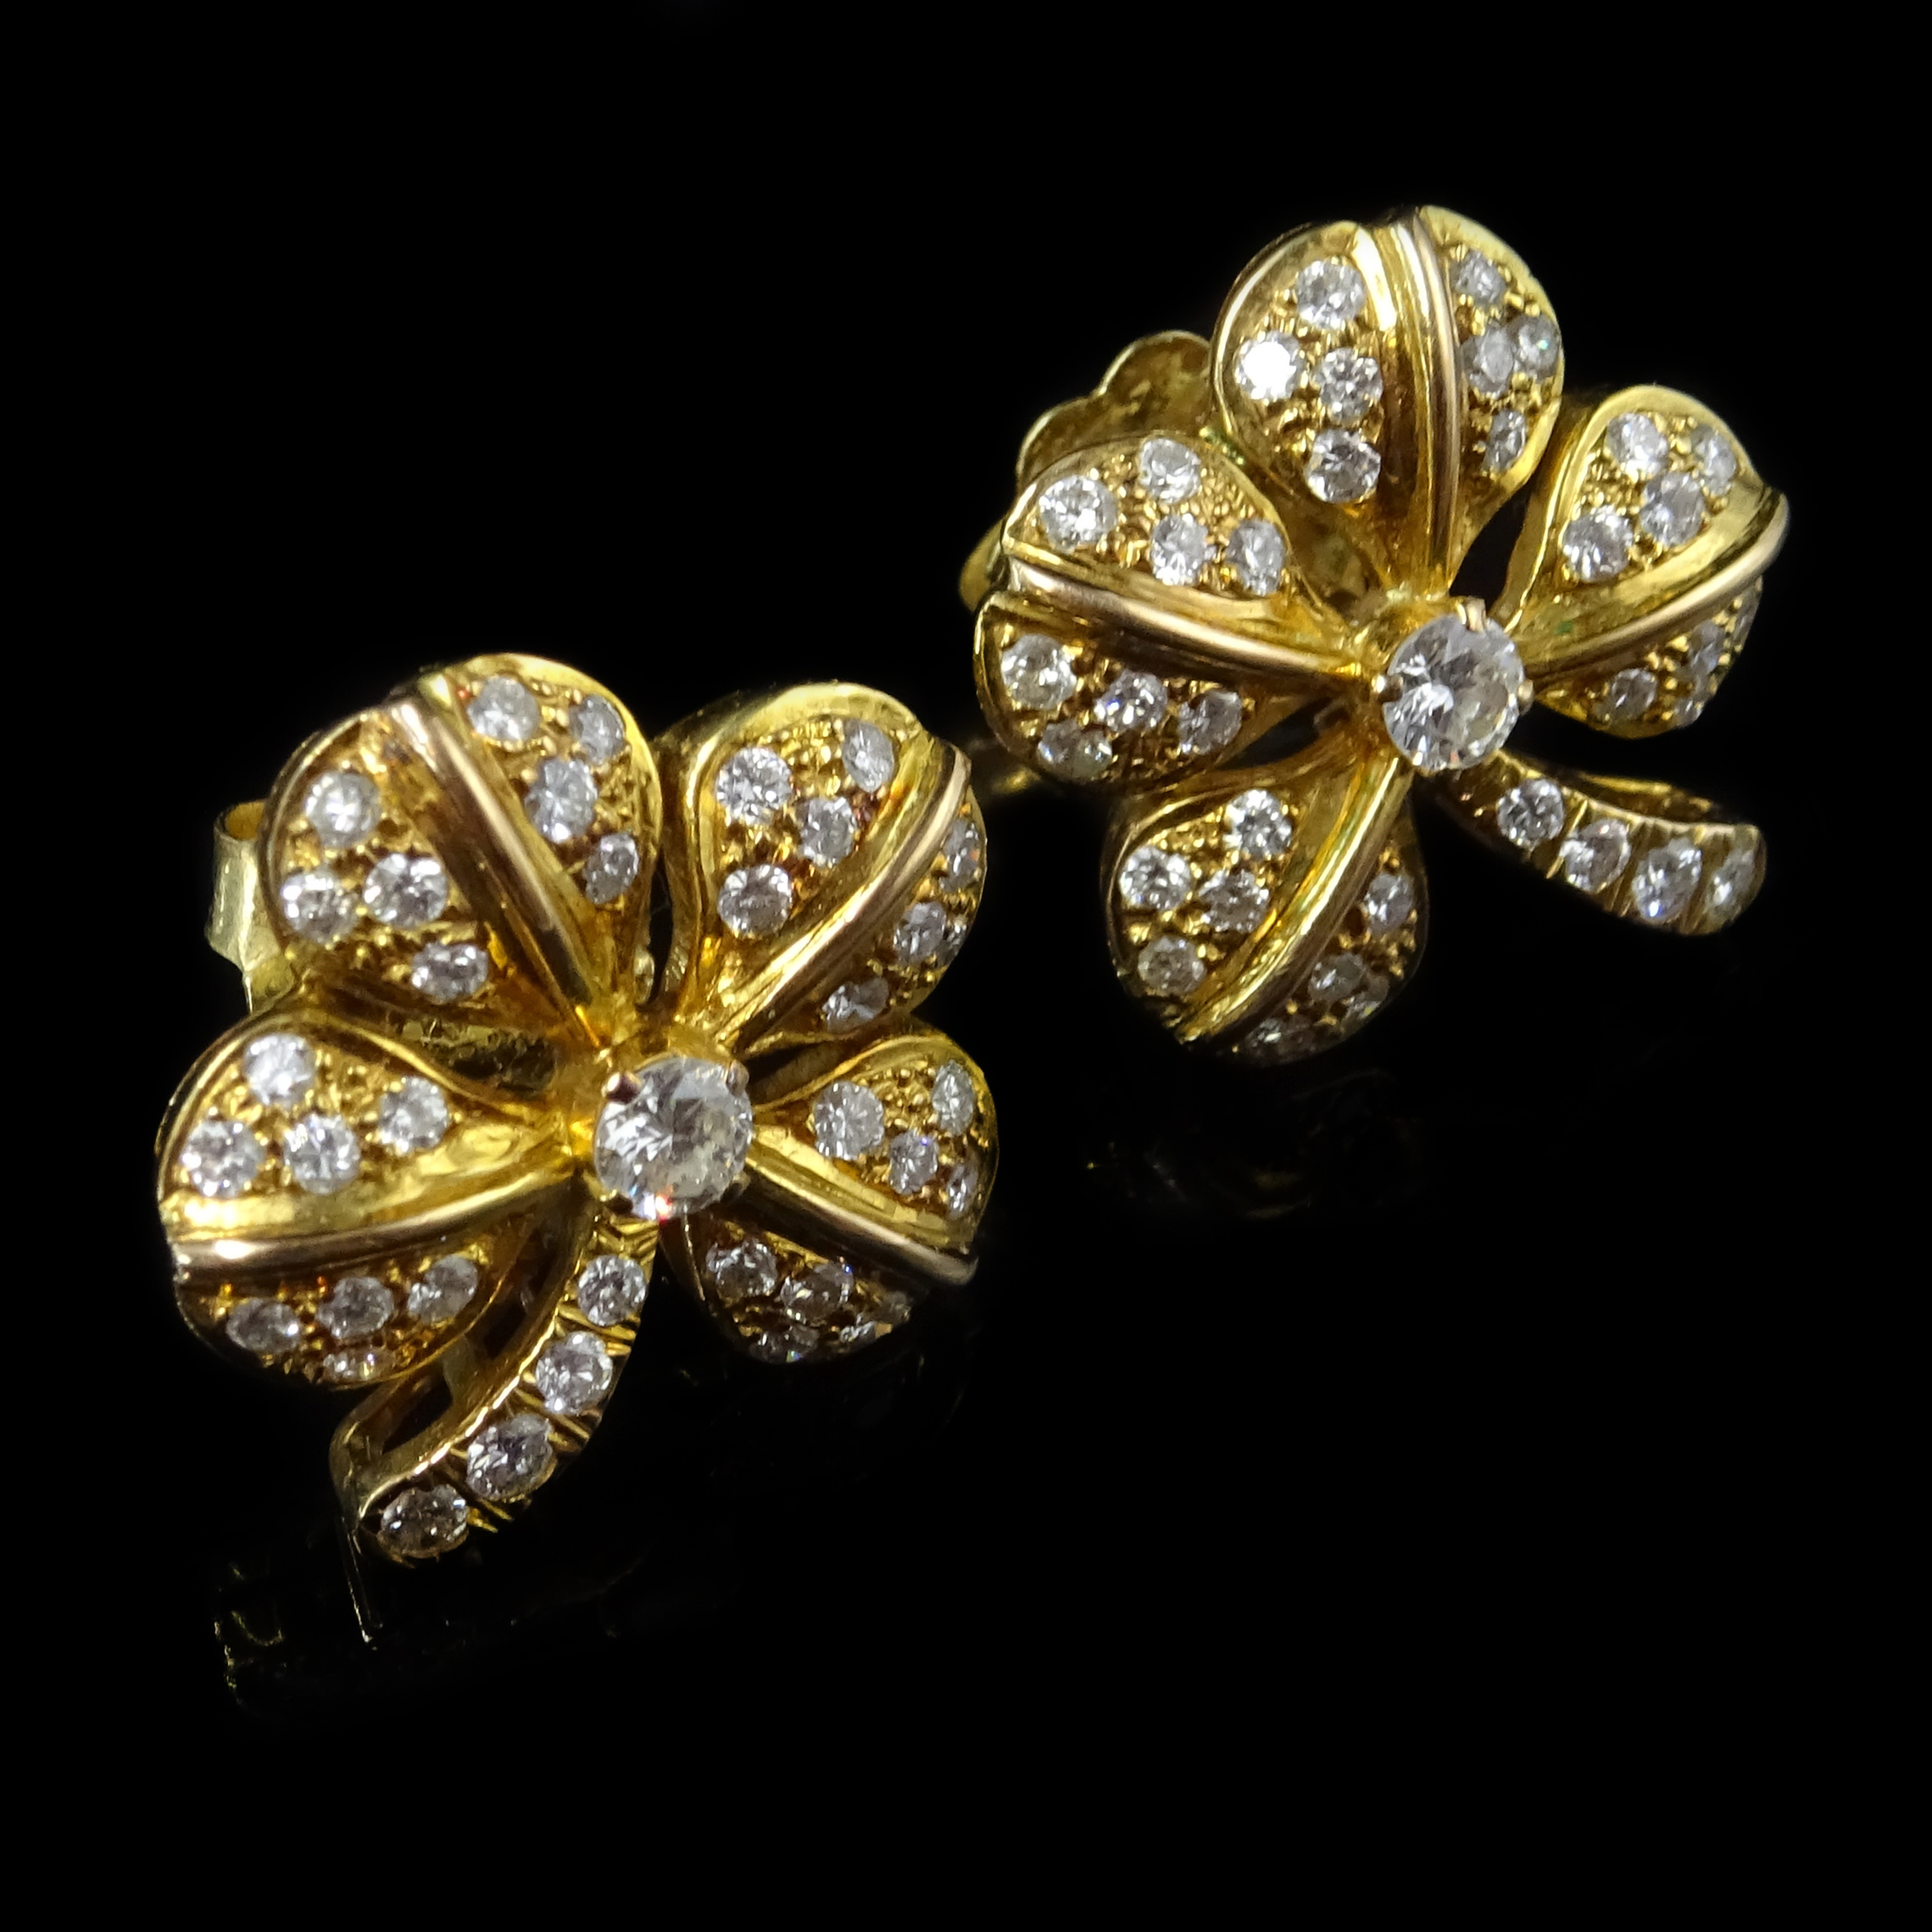 Pair of 18ct gold diamond set clover ear-rings, - Image 5 of 5